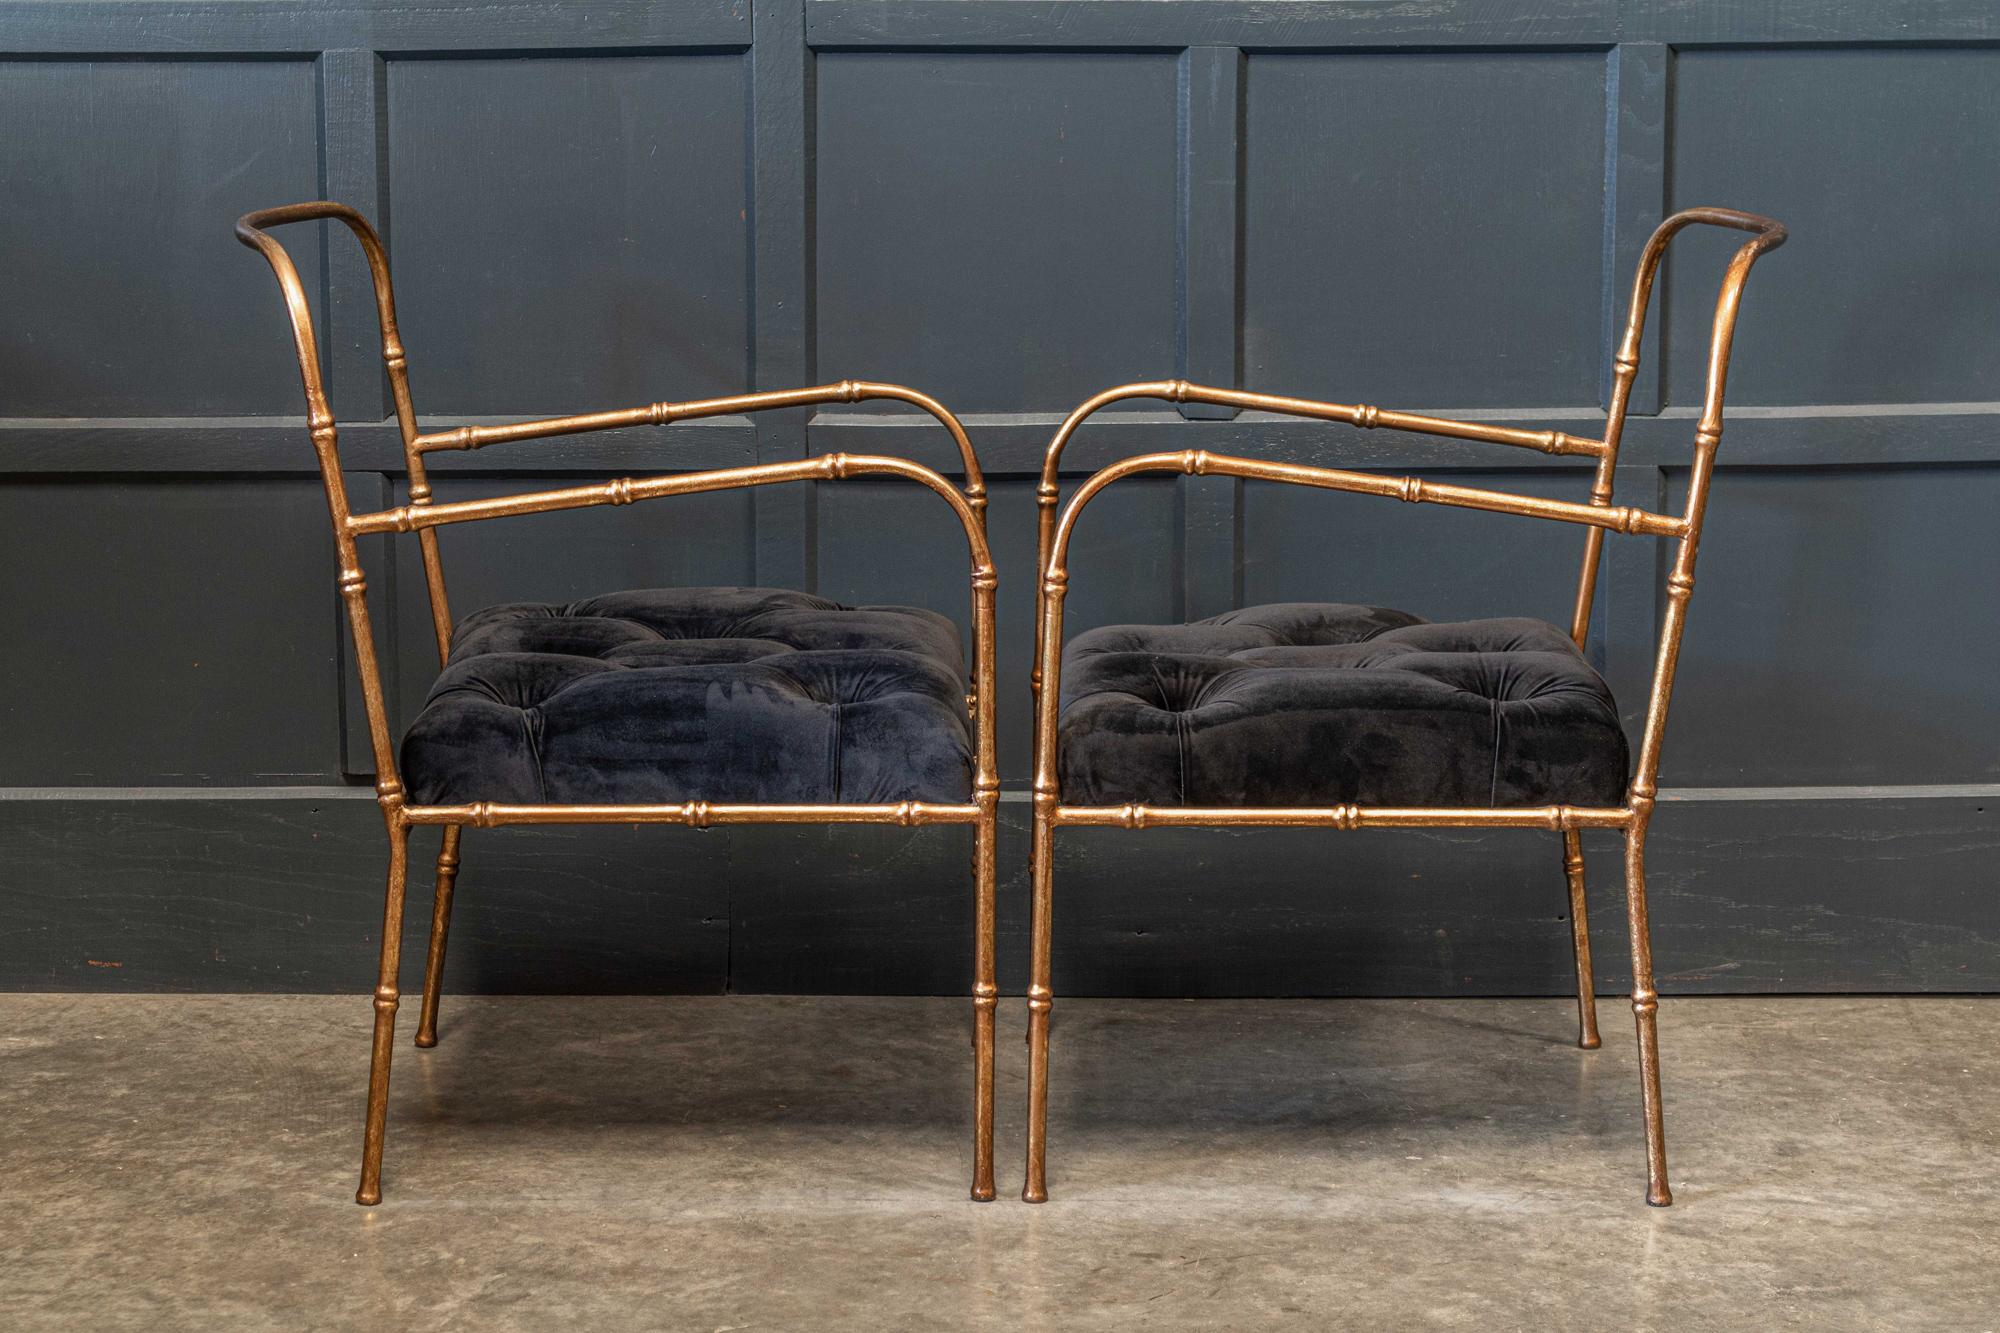 Circa. 1950's

Pair French mid century Jacques Adnet style faux bamboo gilt iron armchairs.
Reupholstered in buttoned deep pile rich black velvet.

Price is per pair
(3 pairs available in this size 80cm height, a further 3 pairs available at 85cm